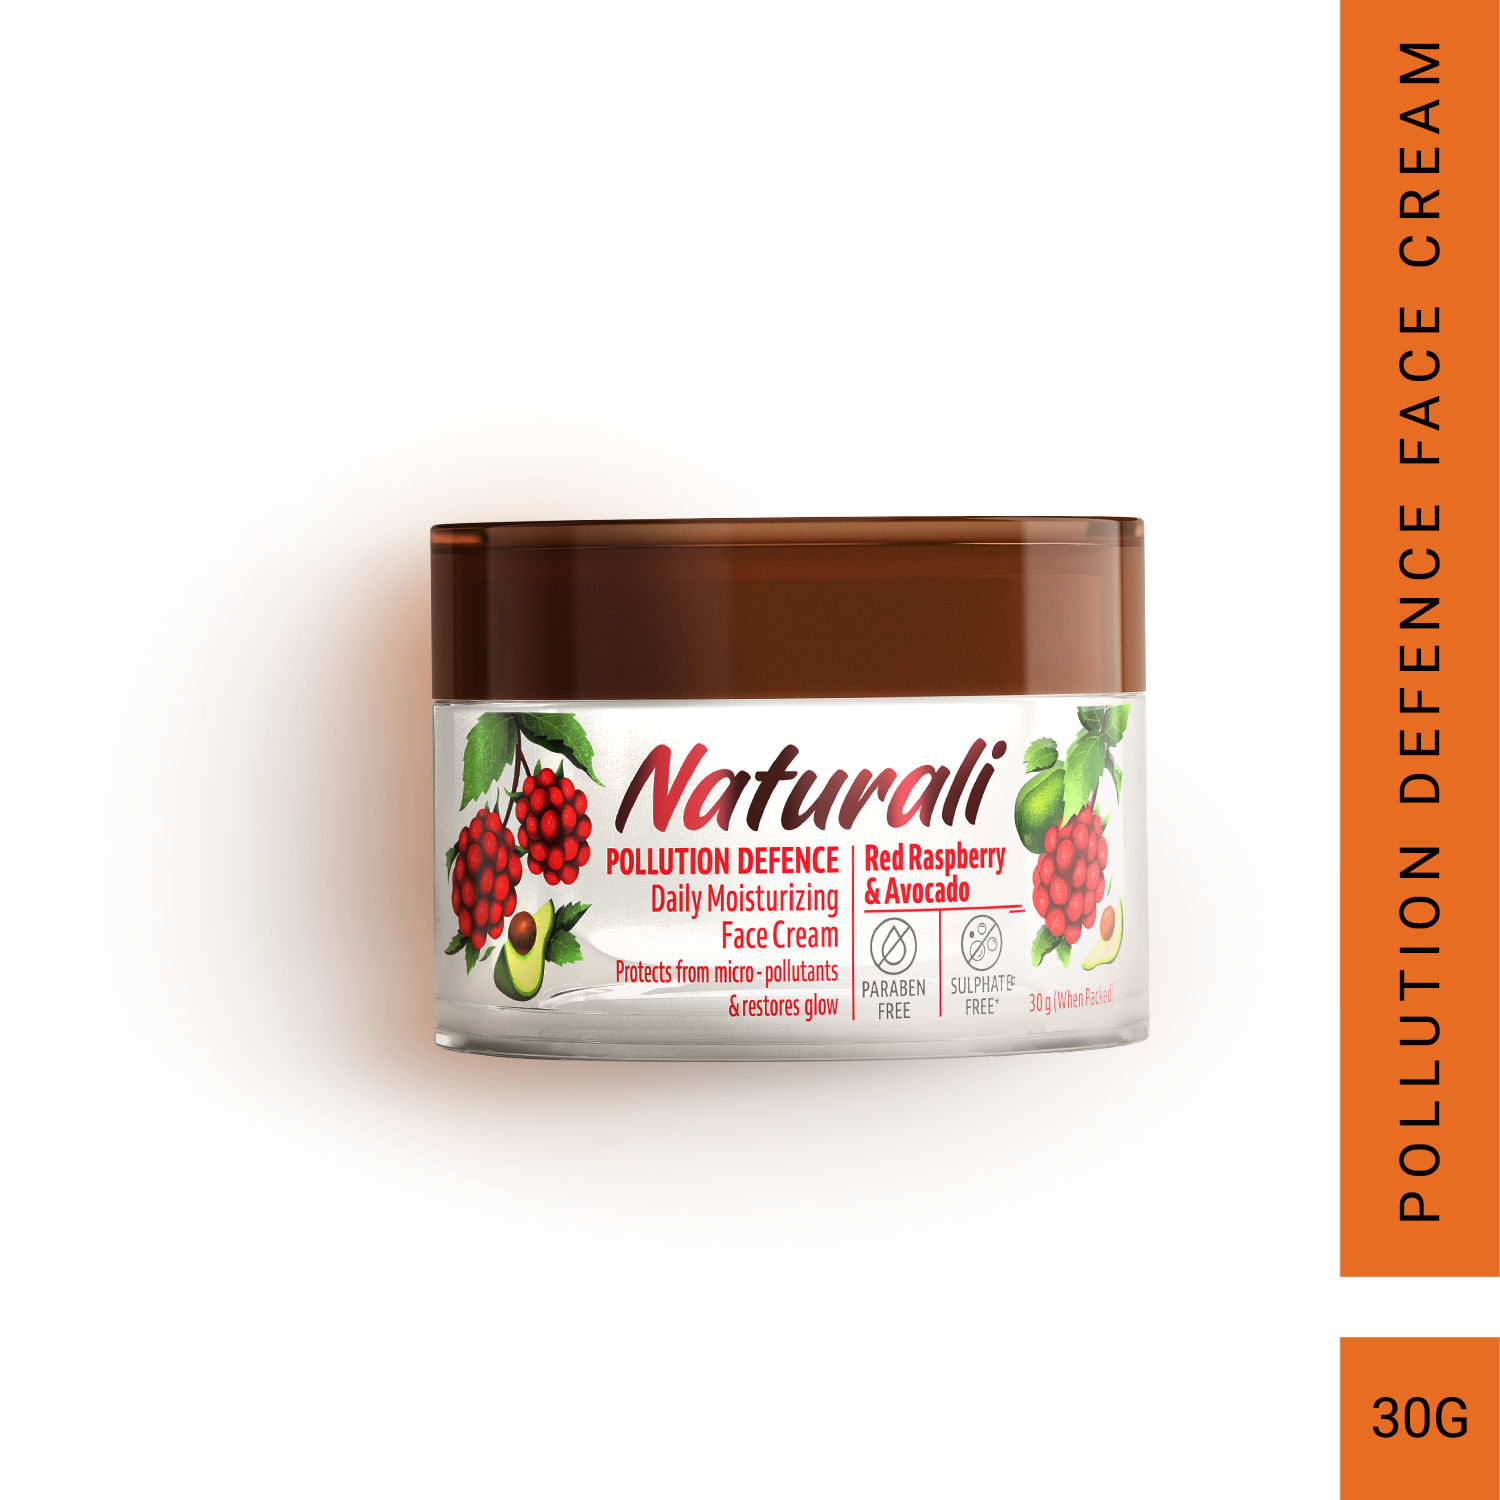 Buy Naturali Pollution Defence Daily Moisturizing Face Cream | With Red Raspberry & Avocado | Protects Skin From Pollution & Restores Natural Glow | 30 gm - Purplle